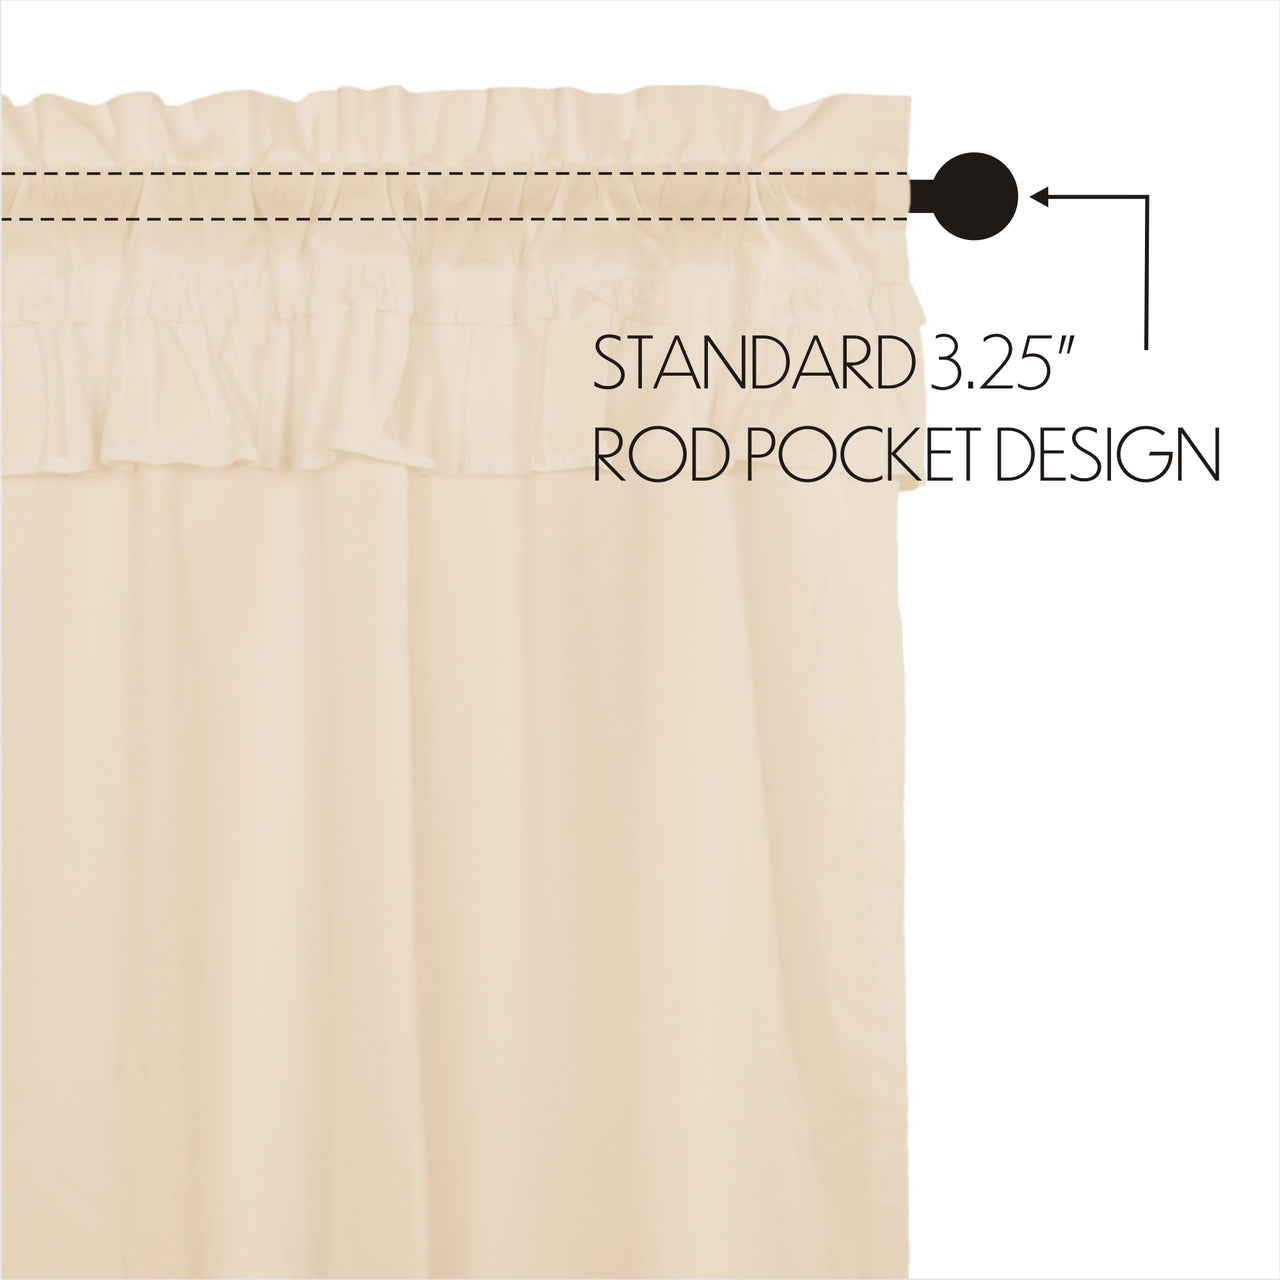 Muslin Ruffled Unbleached Natural Valance Curtain 16x60 VHC Brands